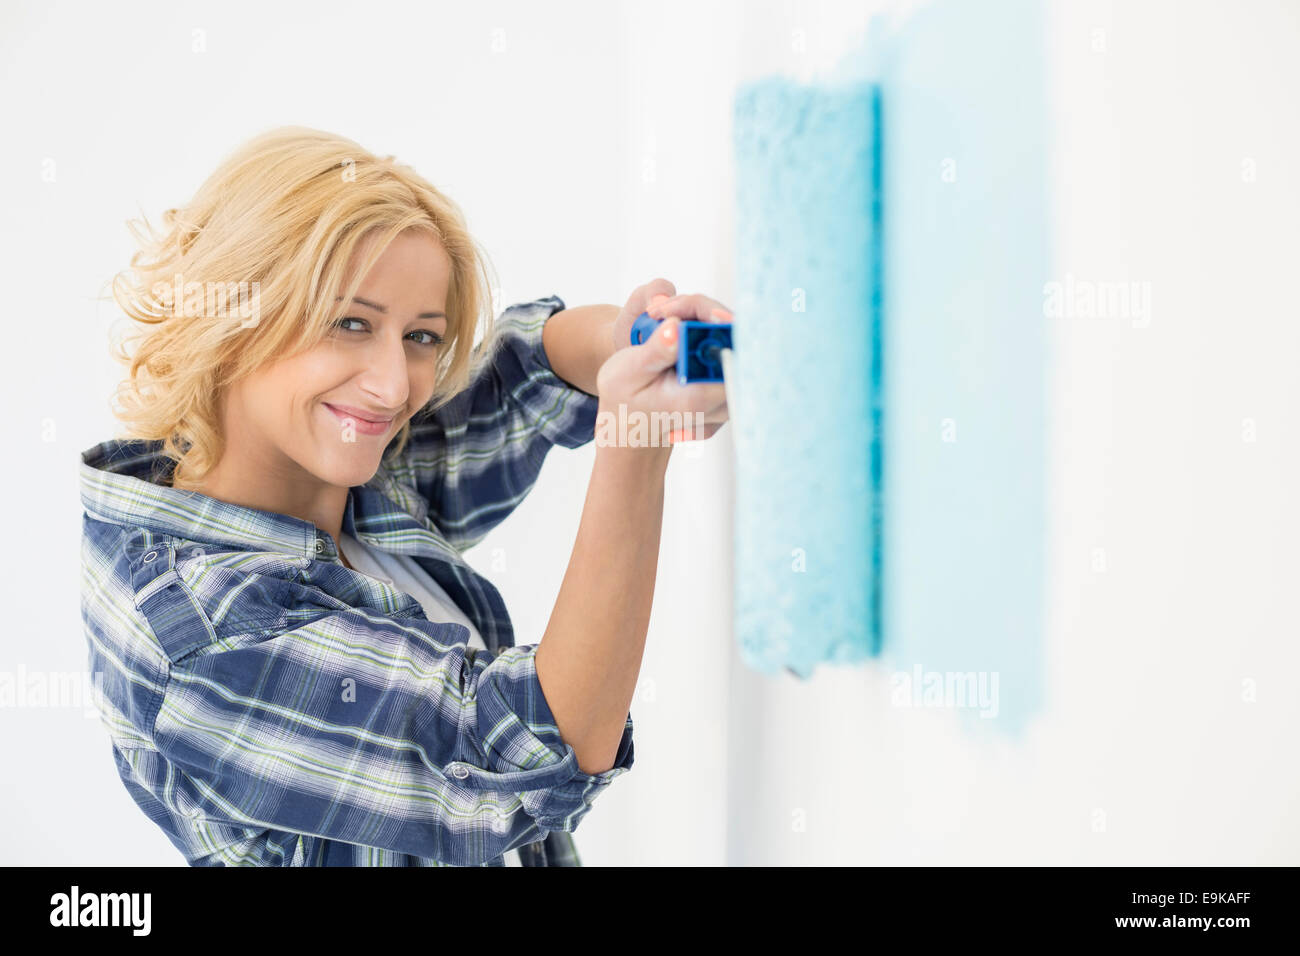 Portrait of Beautiful woman painting wall with paint roller Banque D'Images